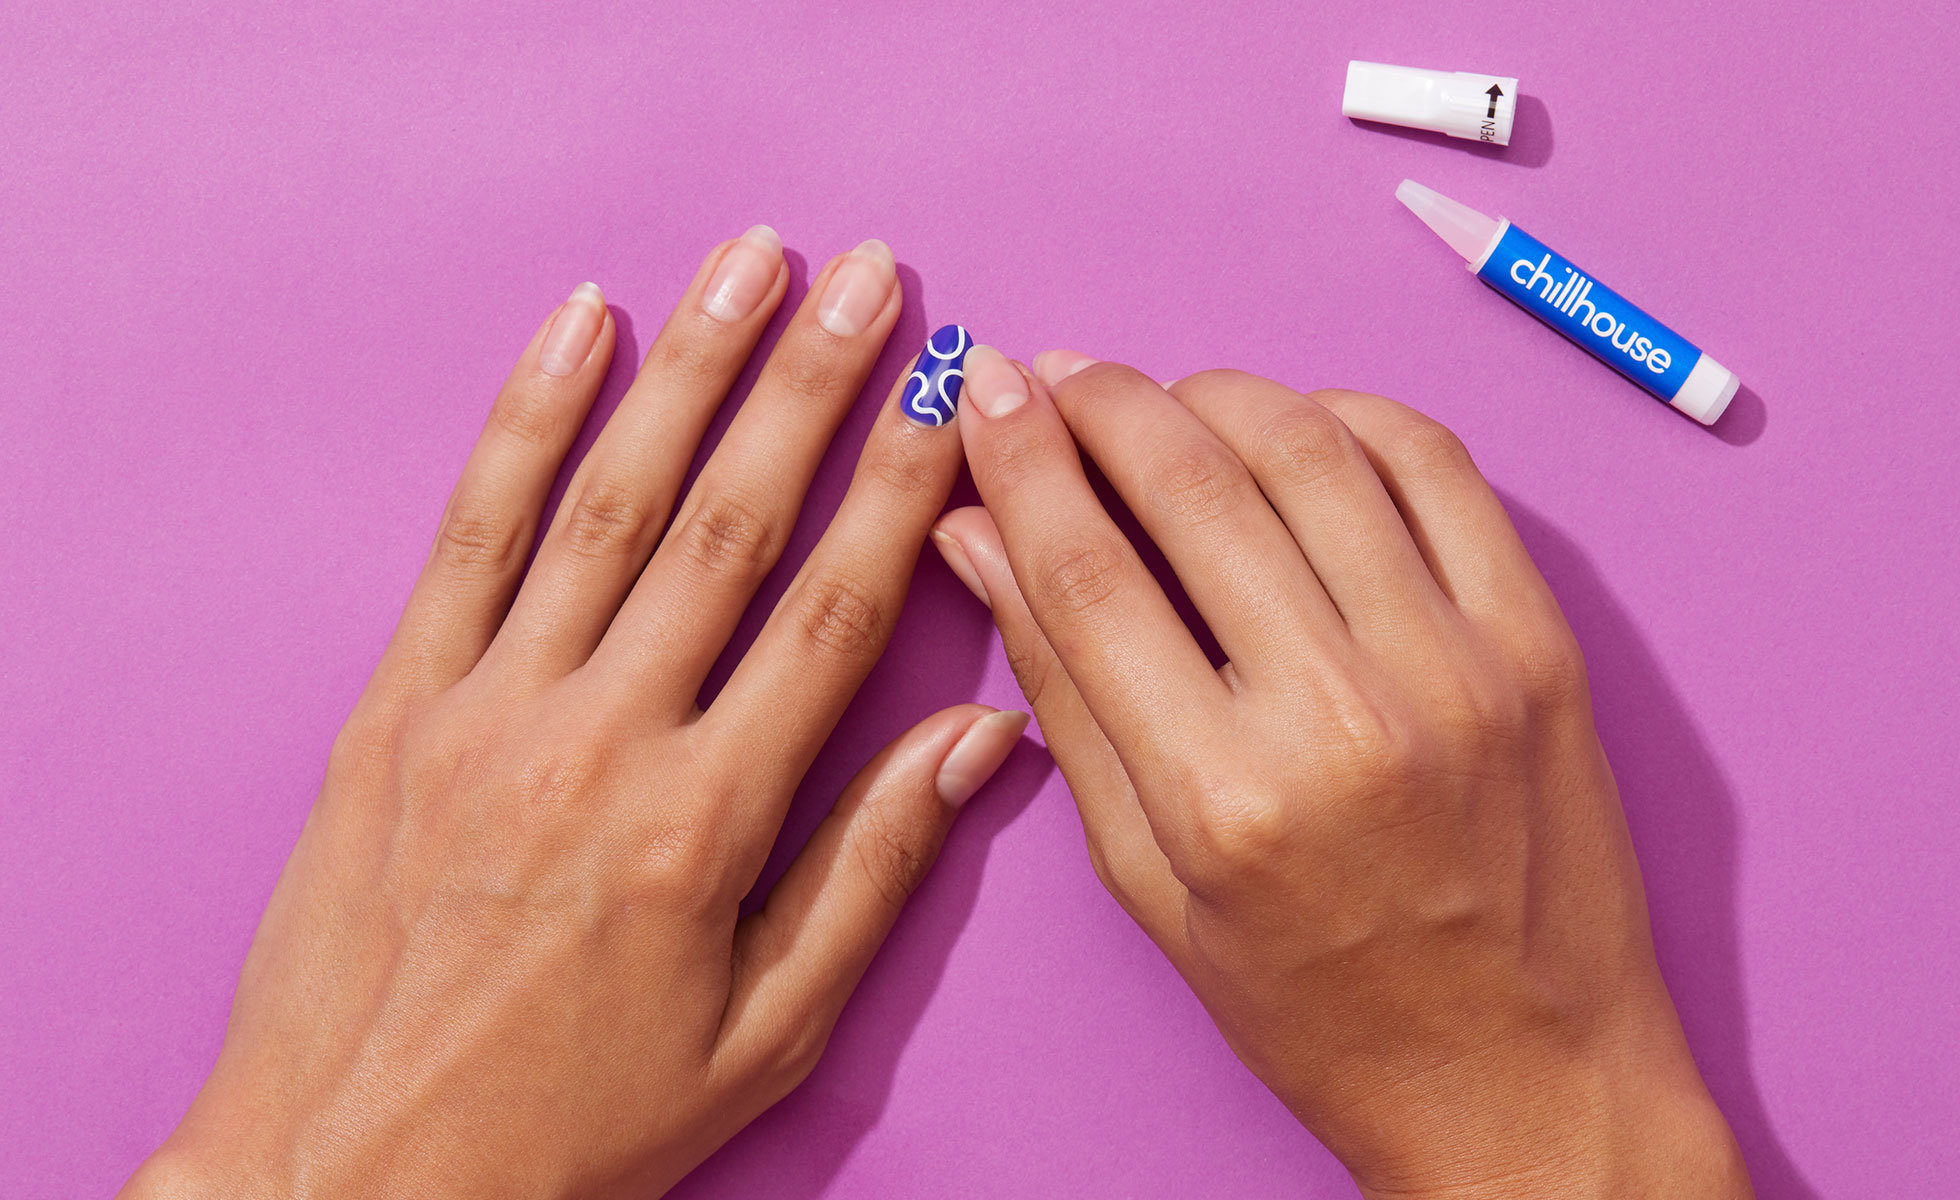 Tips and Tricks To Get the Most Out of Your Chillhouse Nails | Beautylish